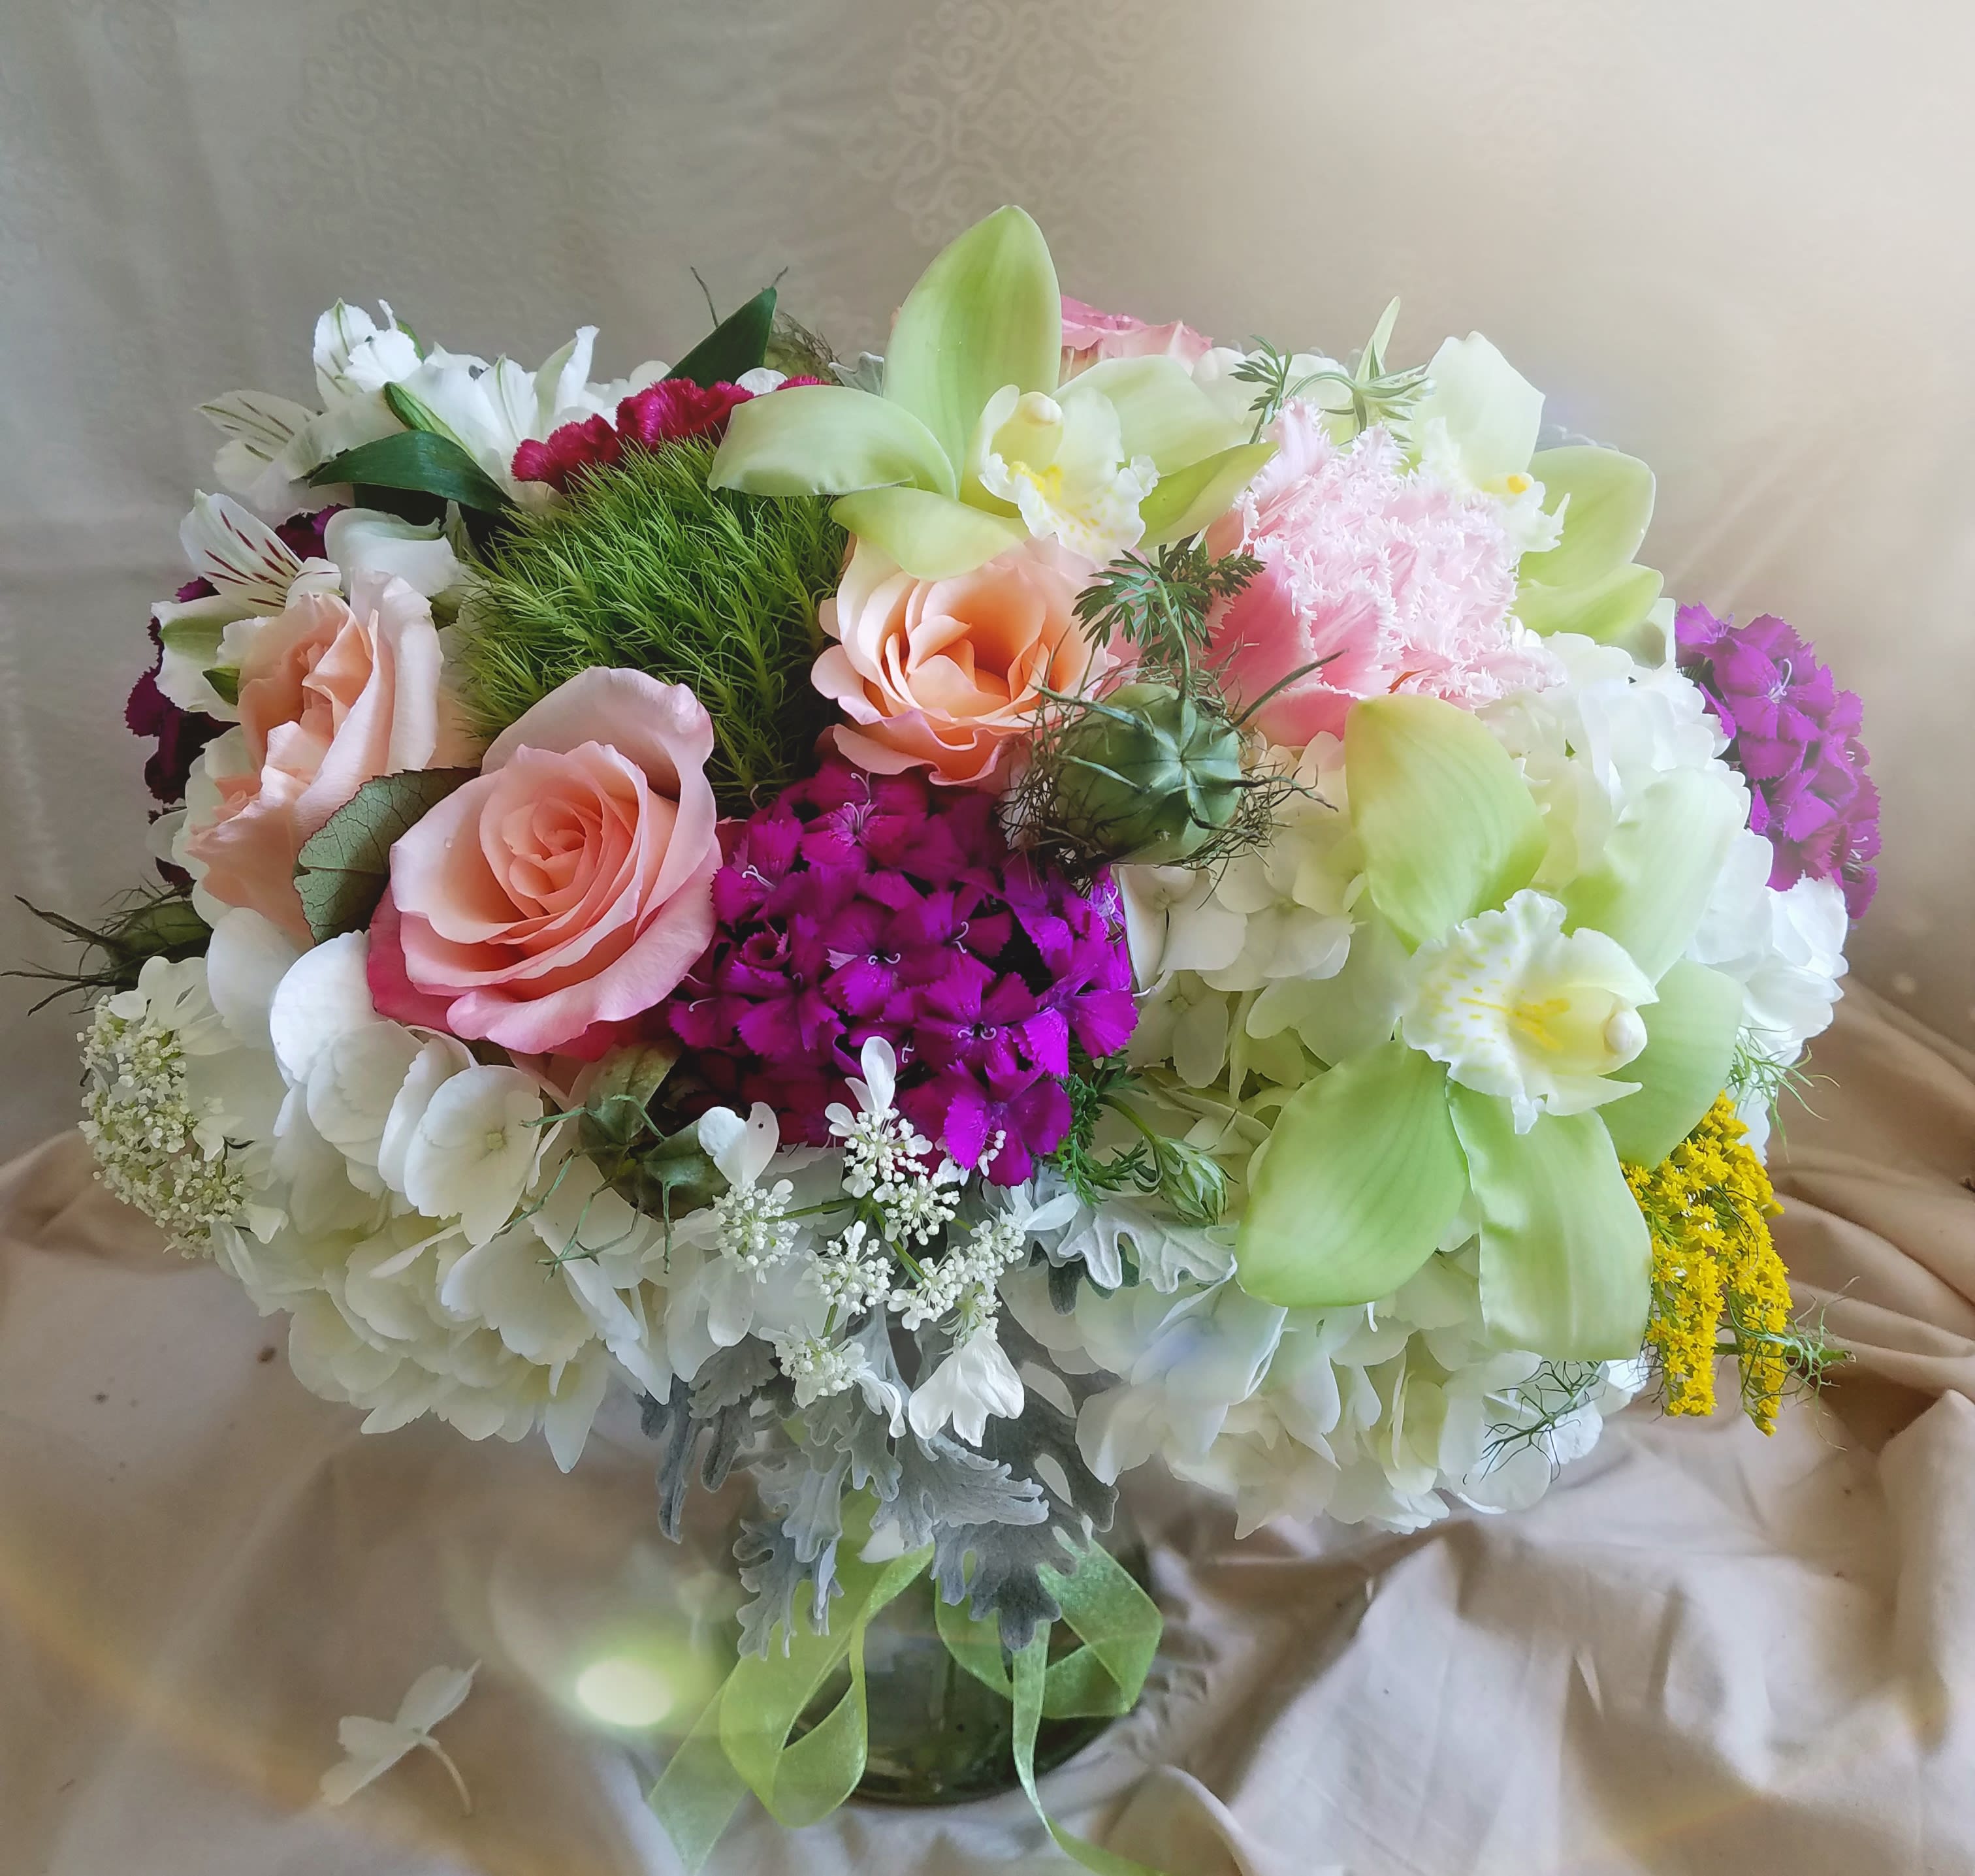 Mae - Spray roses, hydrangea, and orchids